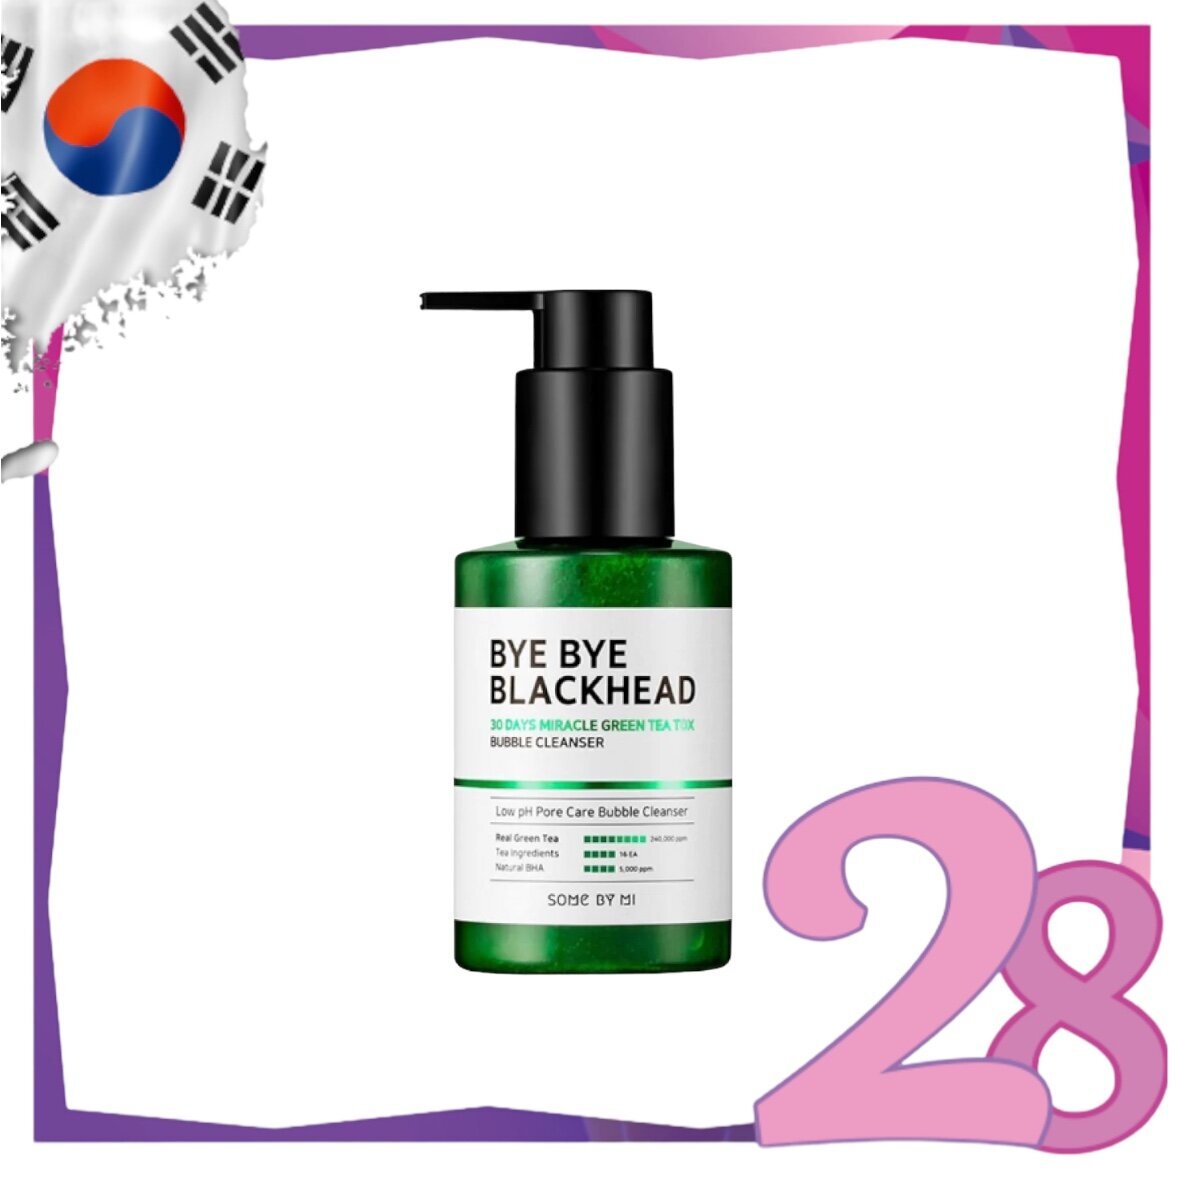 SOME BY MI - *Bye Bye Blackhead 30Days Miracle Green Tea Tox Bubble Cleanser 120g(8809647390244)